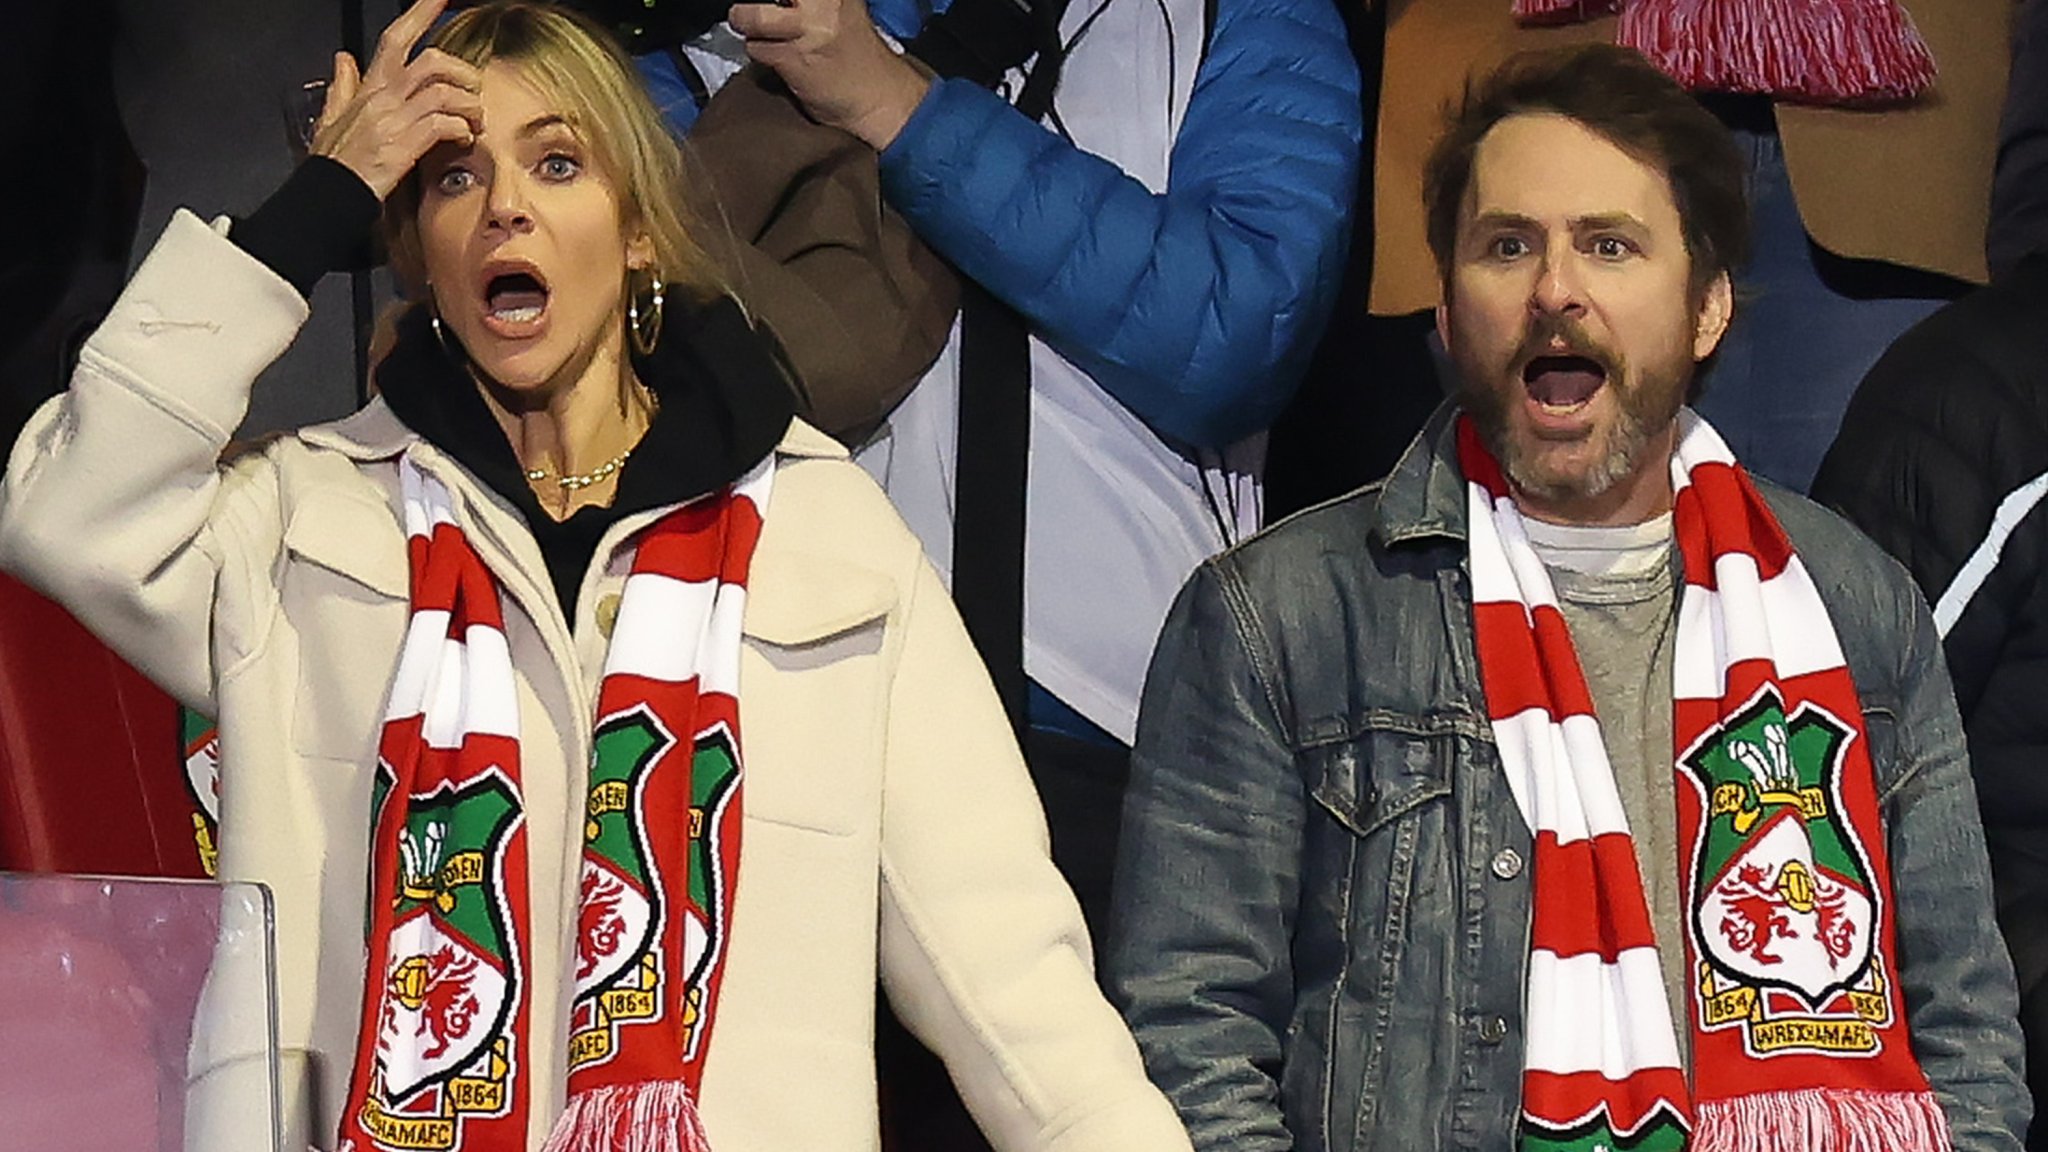 Charlie Day Almost Got In Trouble After Unknowingly Breaking The Law At A Wrexham Game